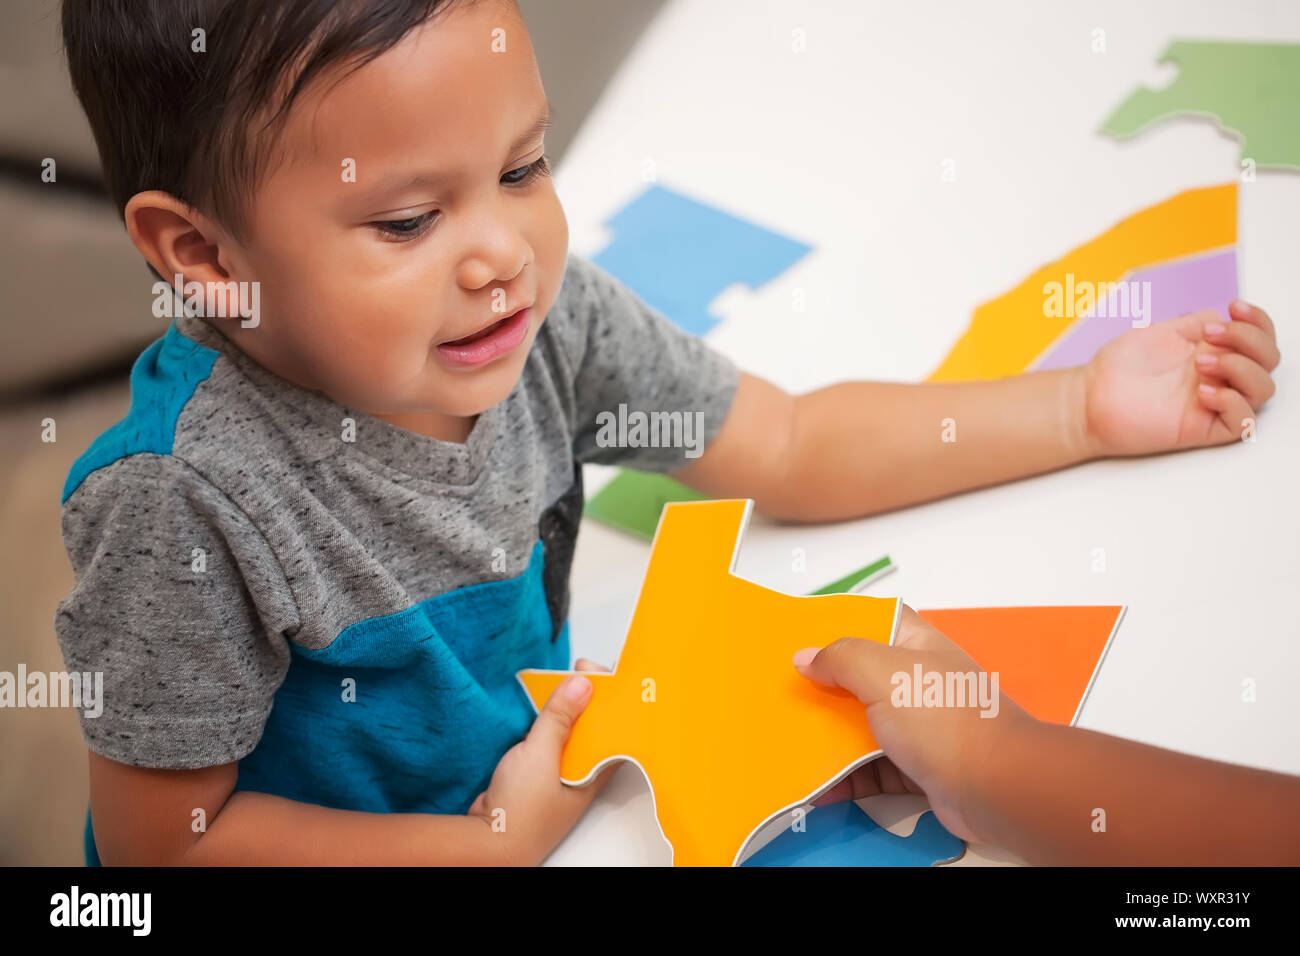 Two kids working together to assemble a North American puzzle, where one child hands over the shape of the state of Texas to a boy. Stock Photo